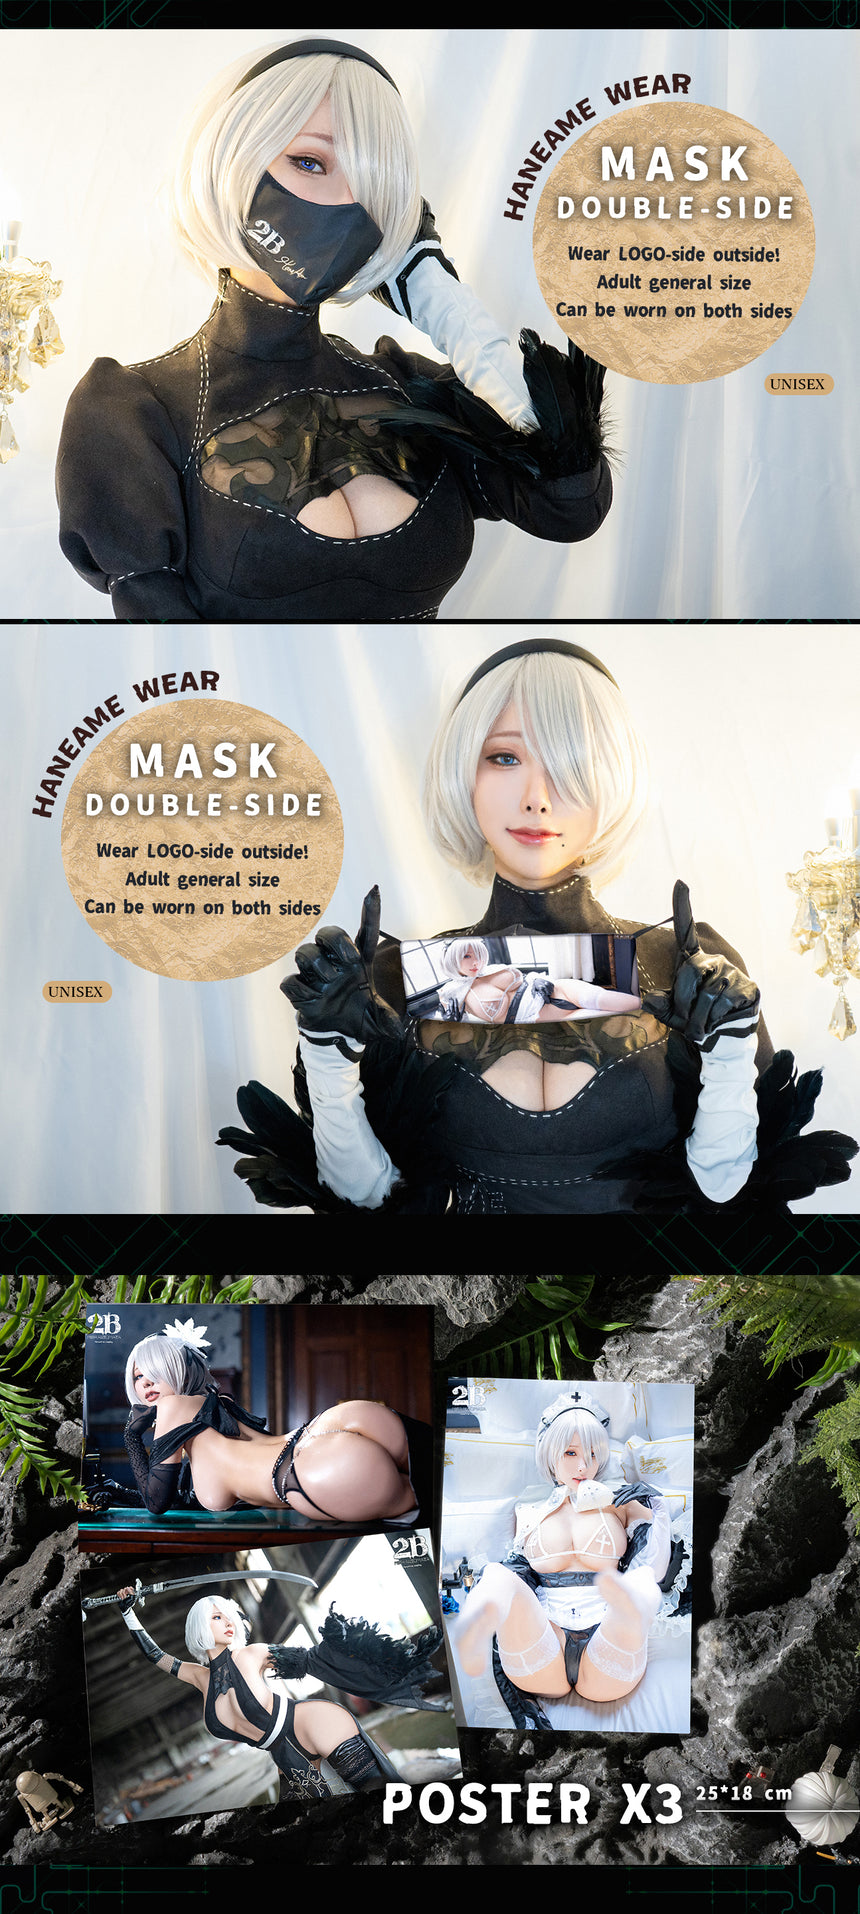 🐈‍⬛ NEW 🐈‍⬛ 《NIER 2B》cosplay Photobook 3D Butt Mouse Pad (Option) HaneAme Vol.47